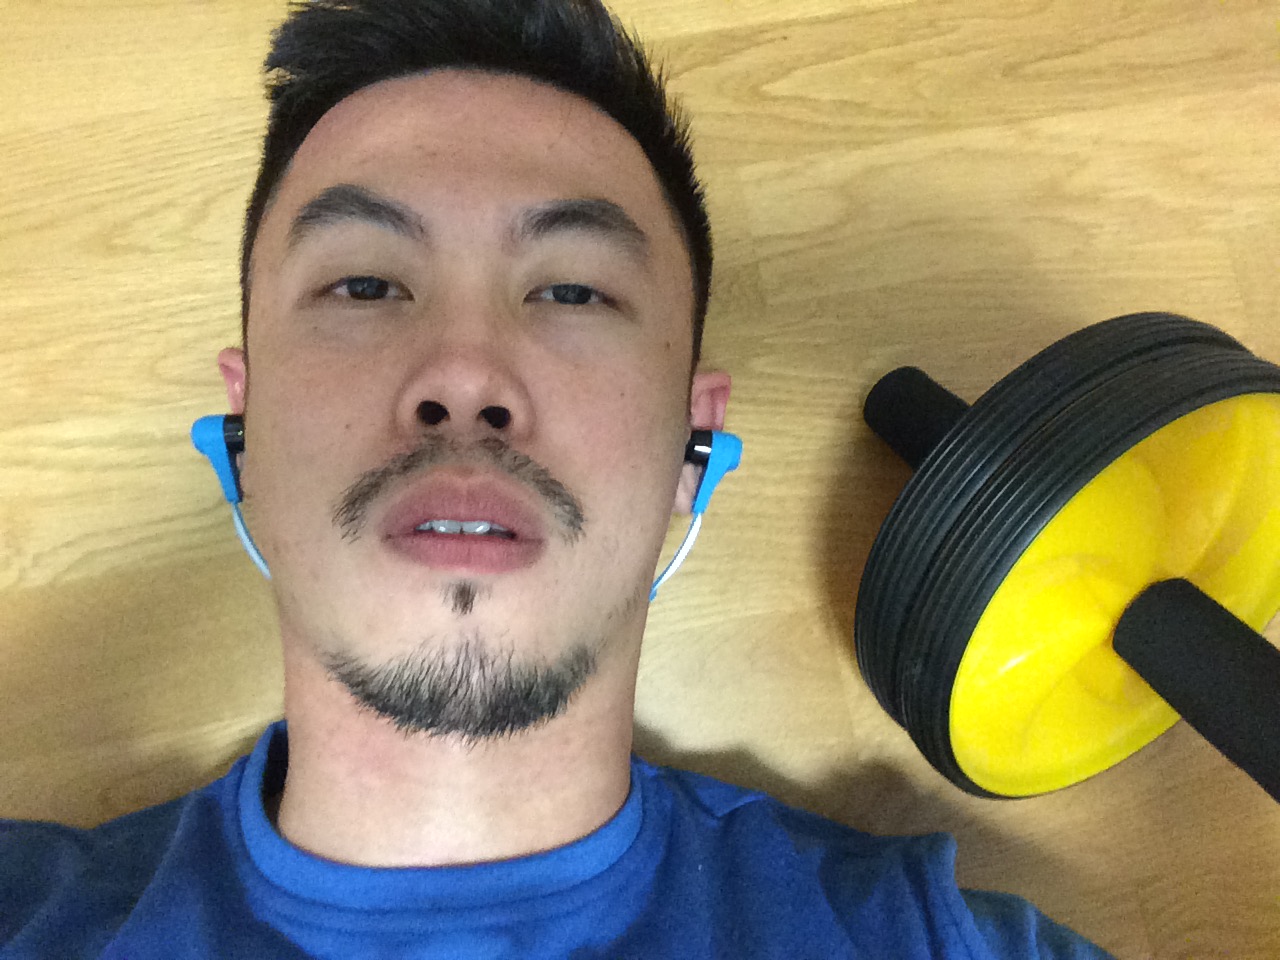 JBL Synchros Reflect earphones a godsend for all gym hitters - Alvinology